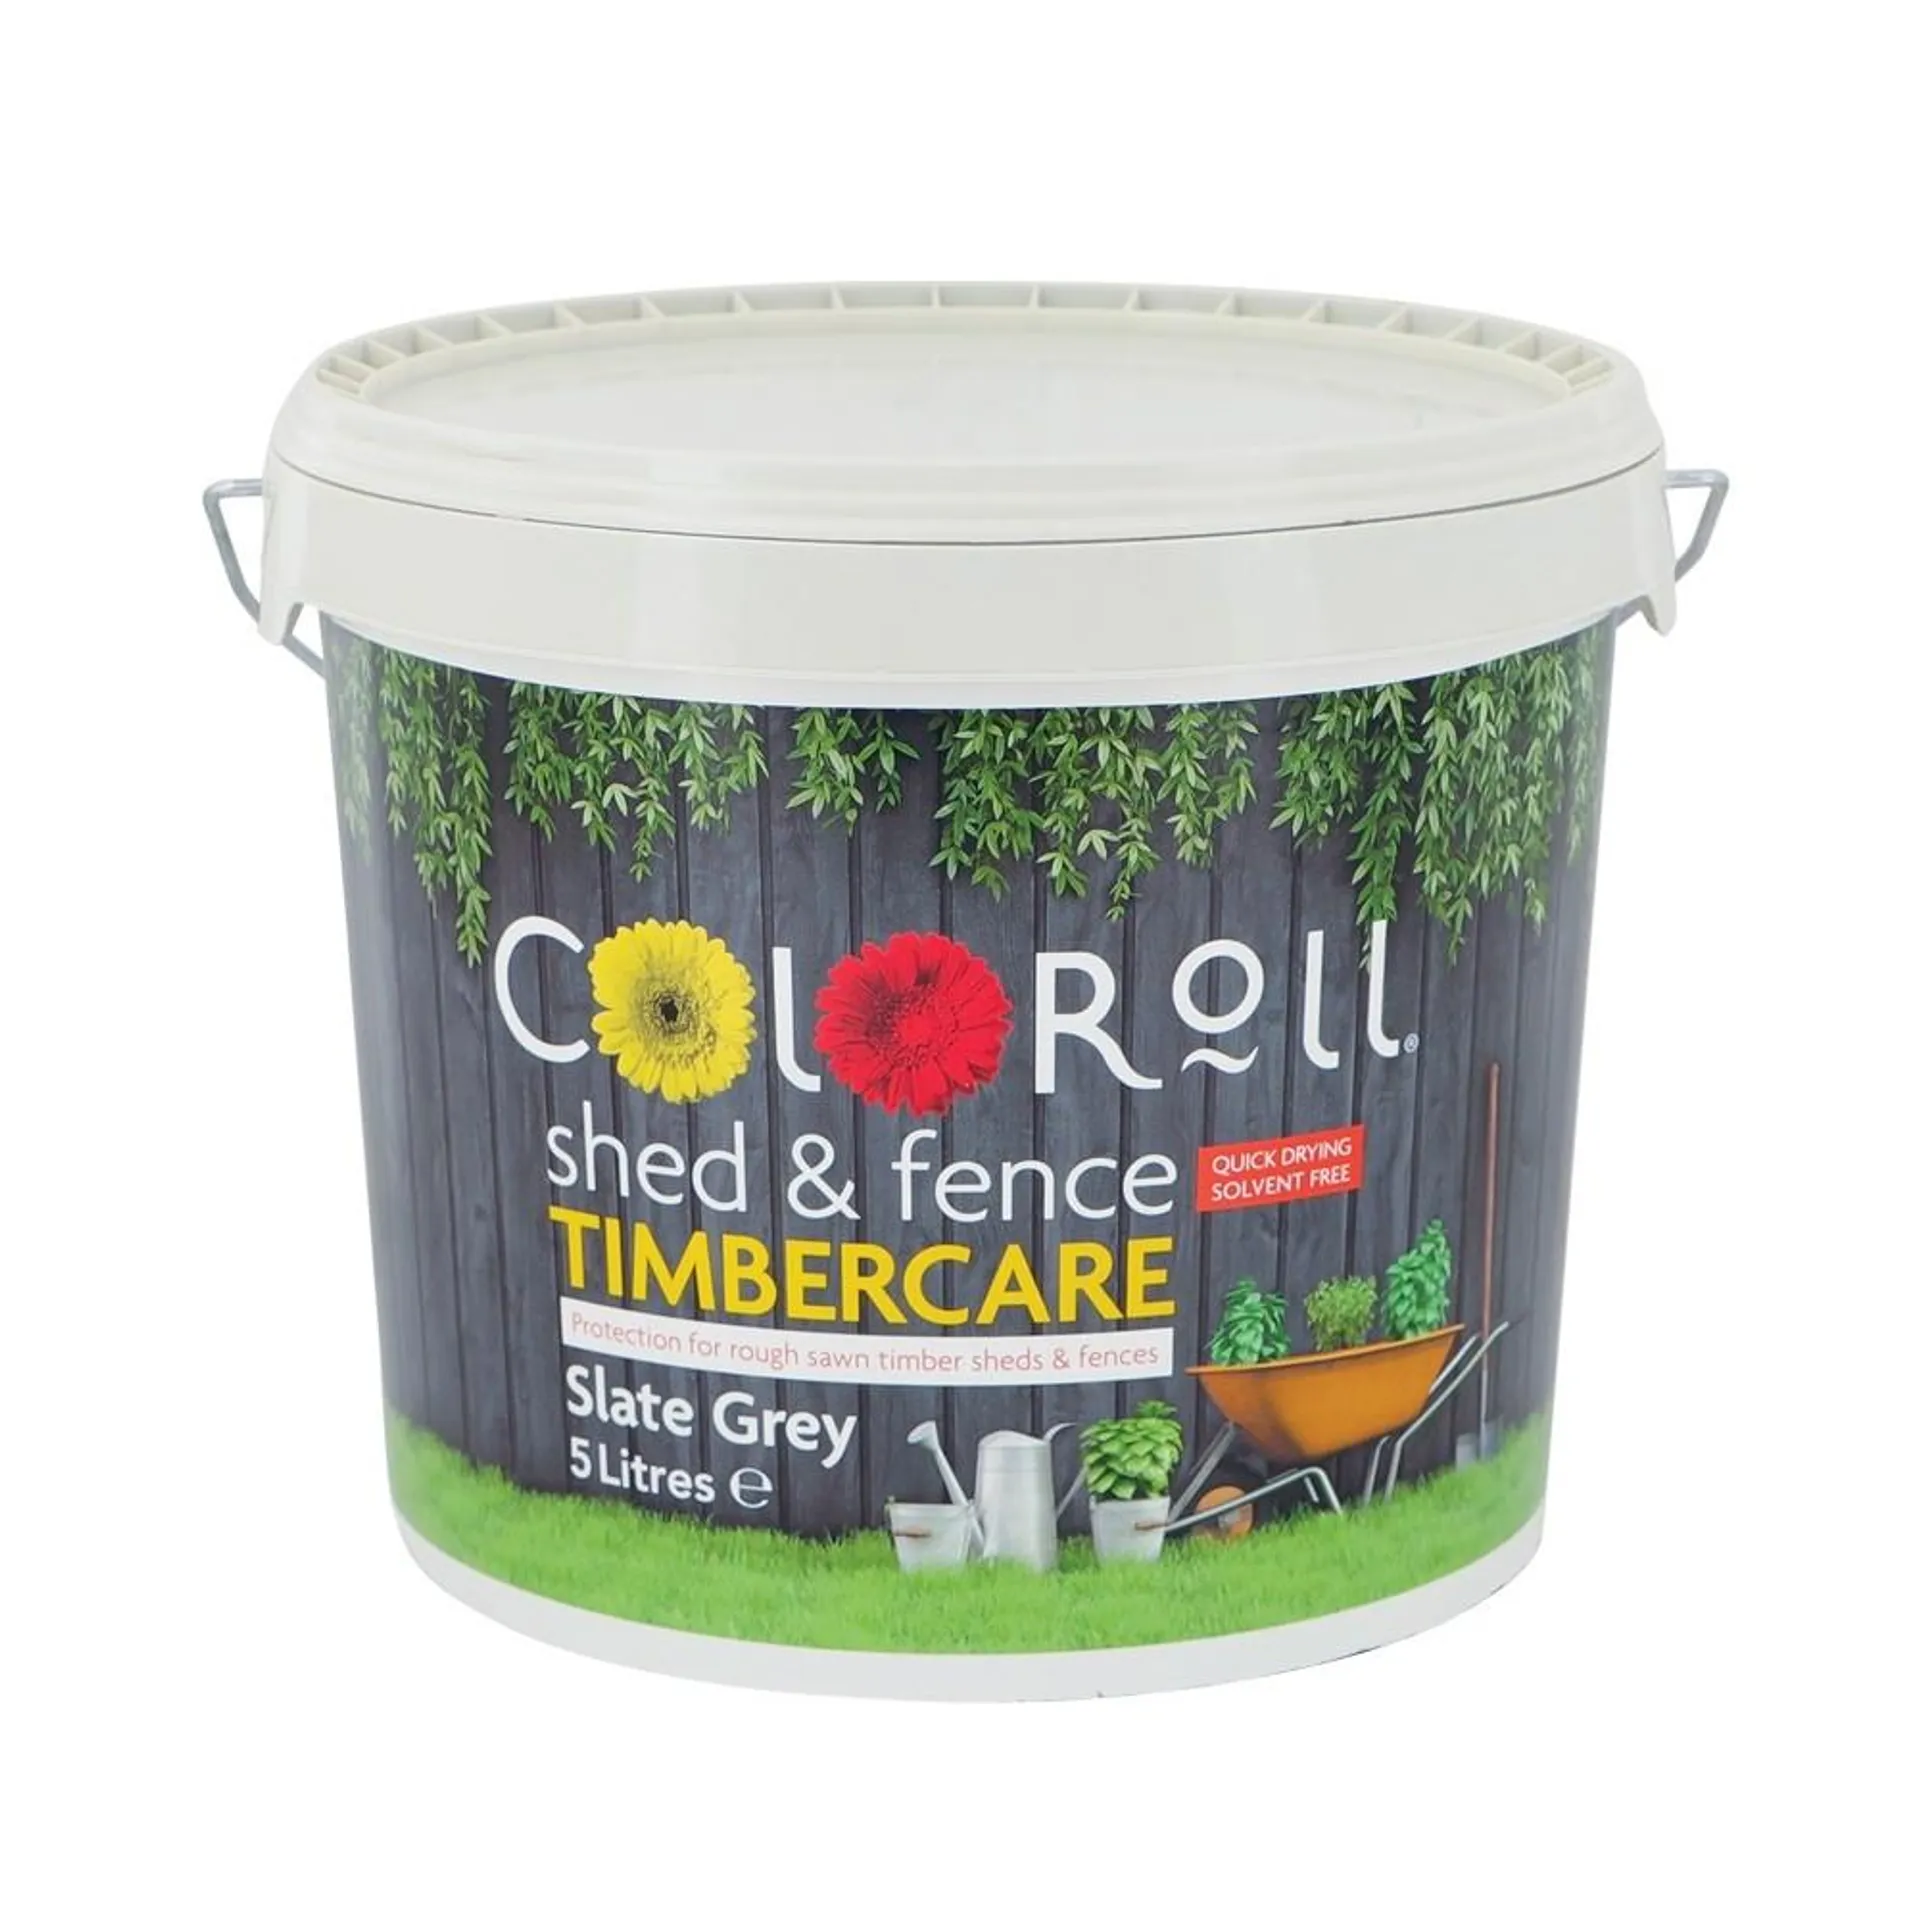 COLOROLL 5 LITRE FENCE PAINT - GREY